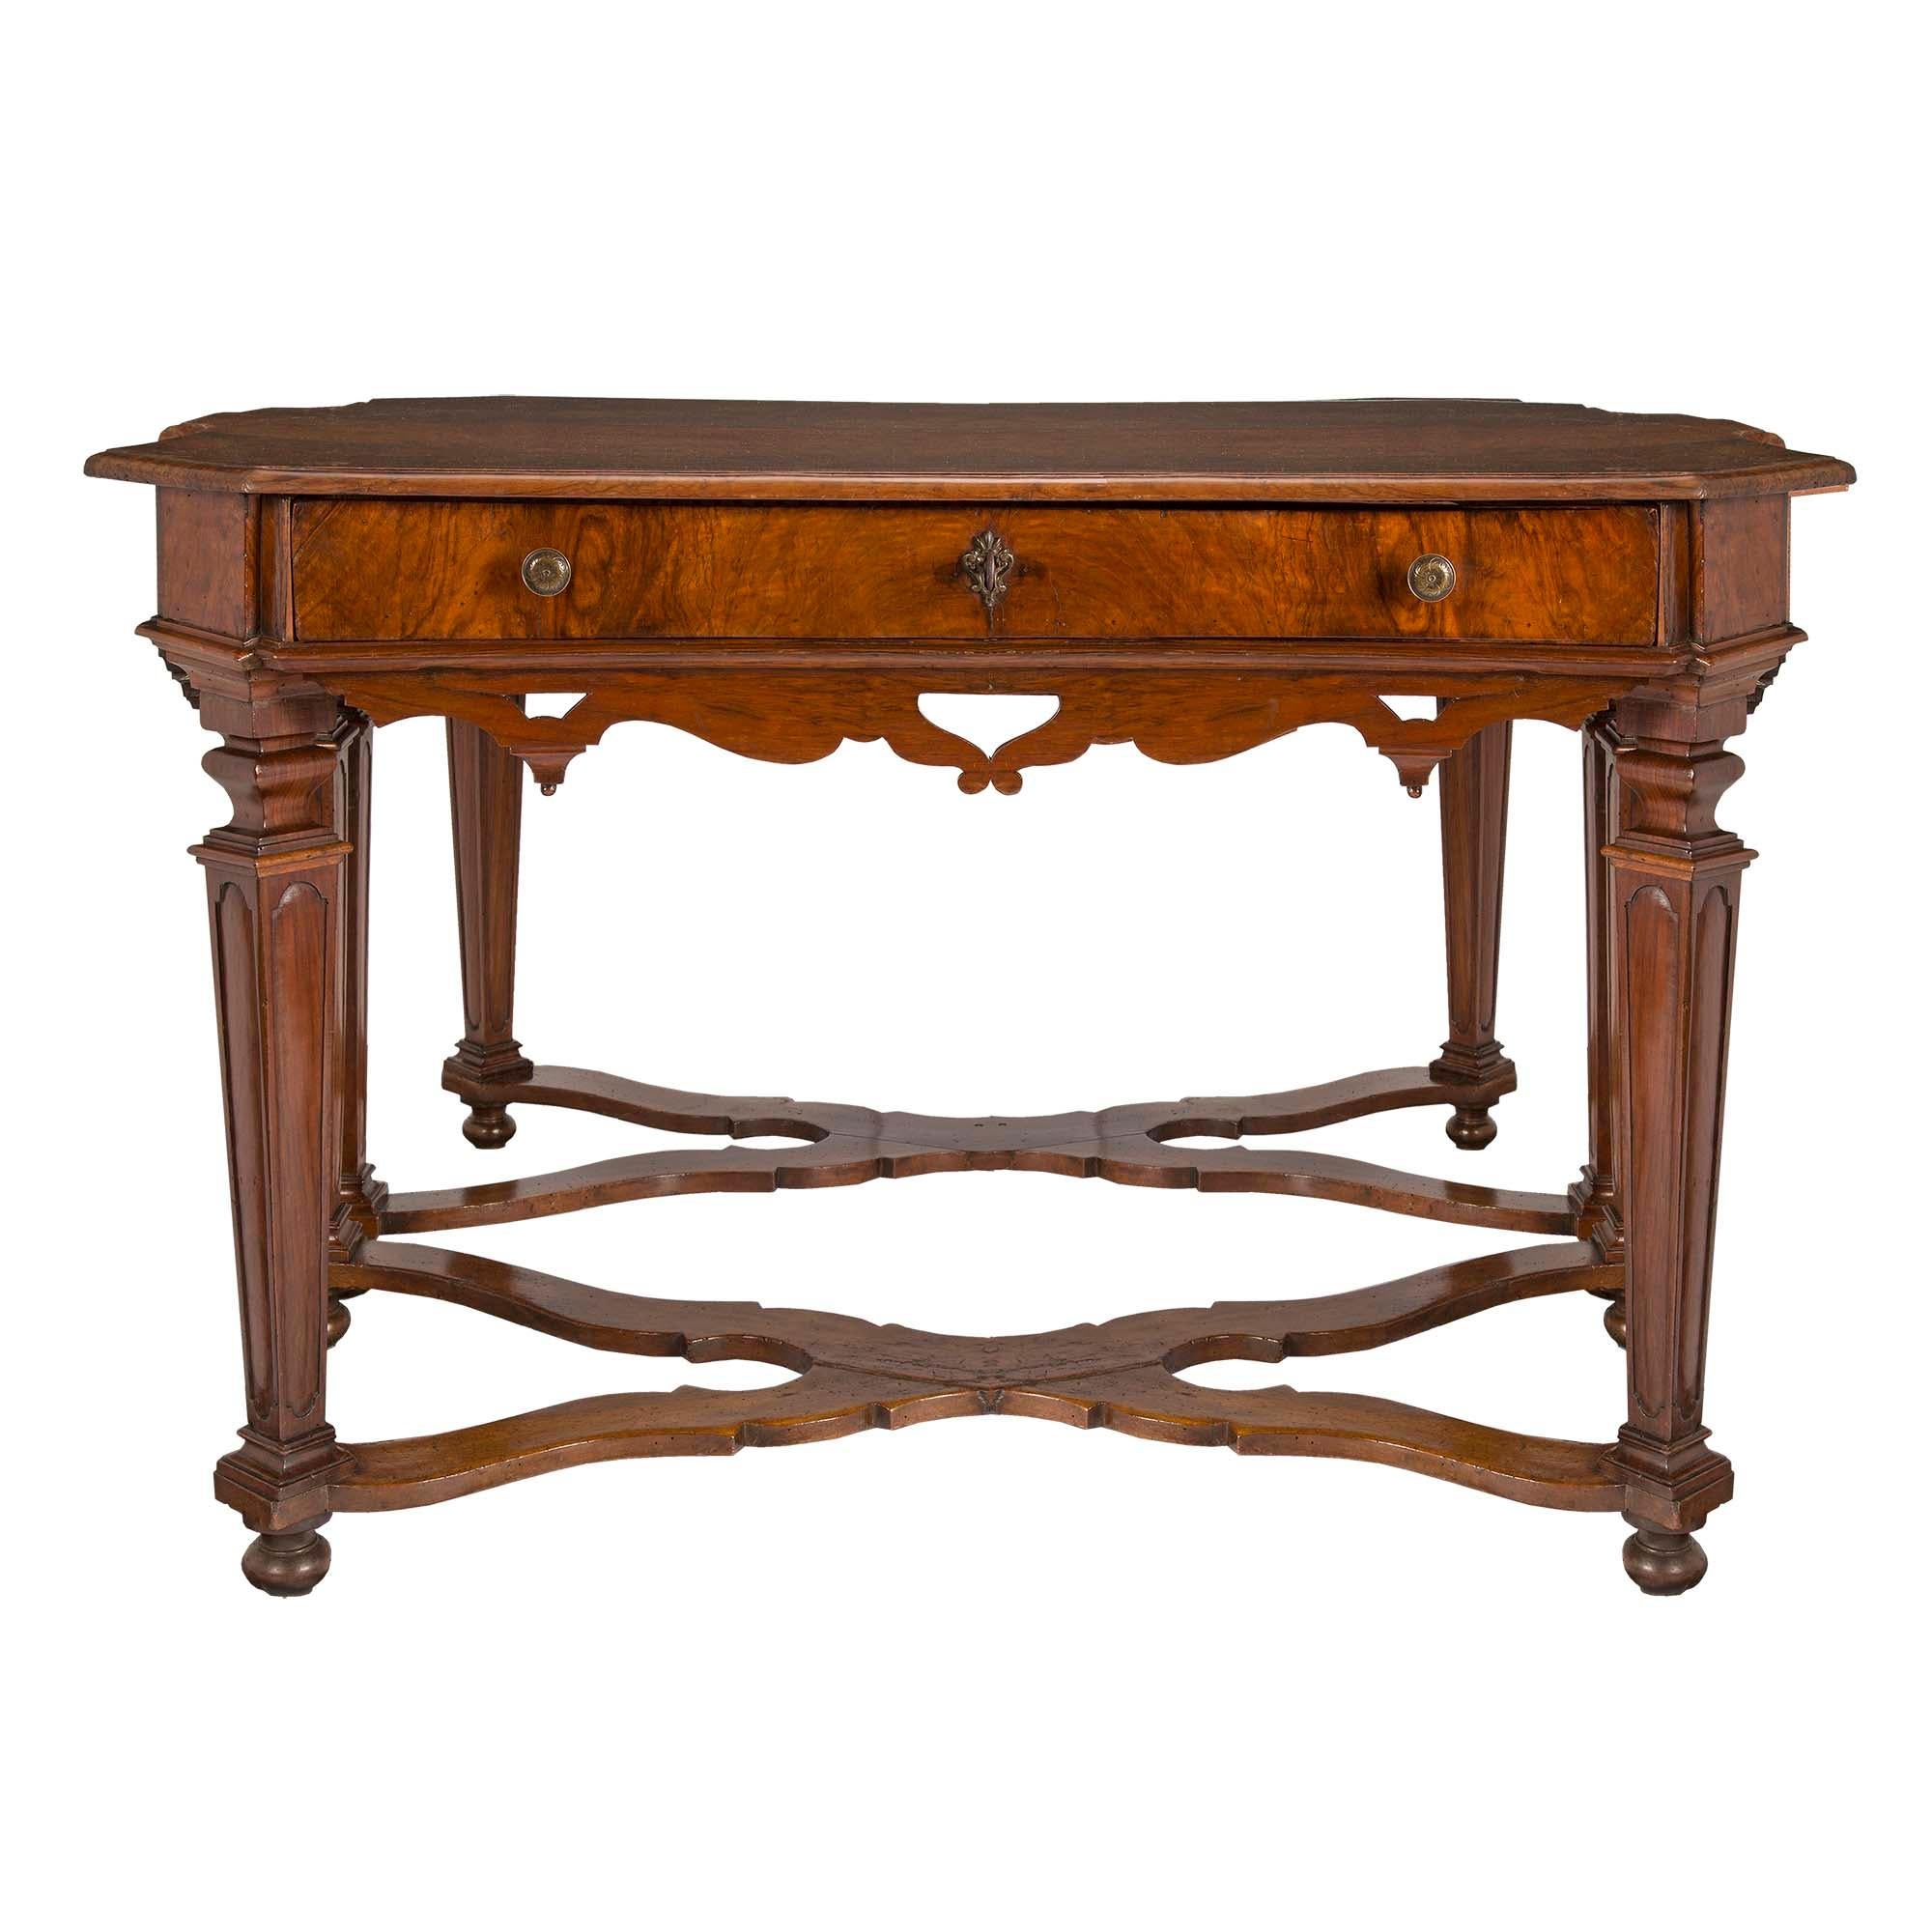 A very handsome and unique Italian 17th century Louis XIV Period walnut consoles/center table from Florence. The consoles may be displayed seperately or when placed back to back may be used as a center table. Each console is raised on topie feet